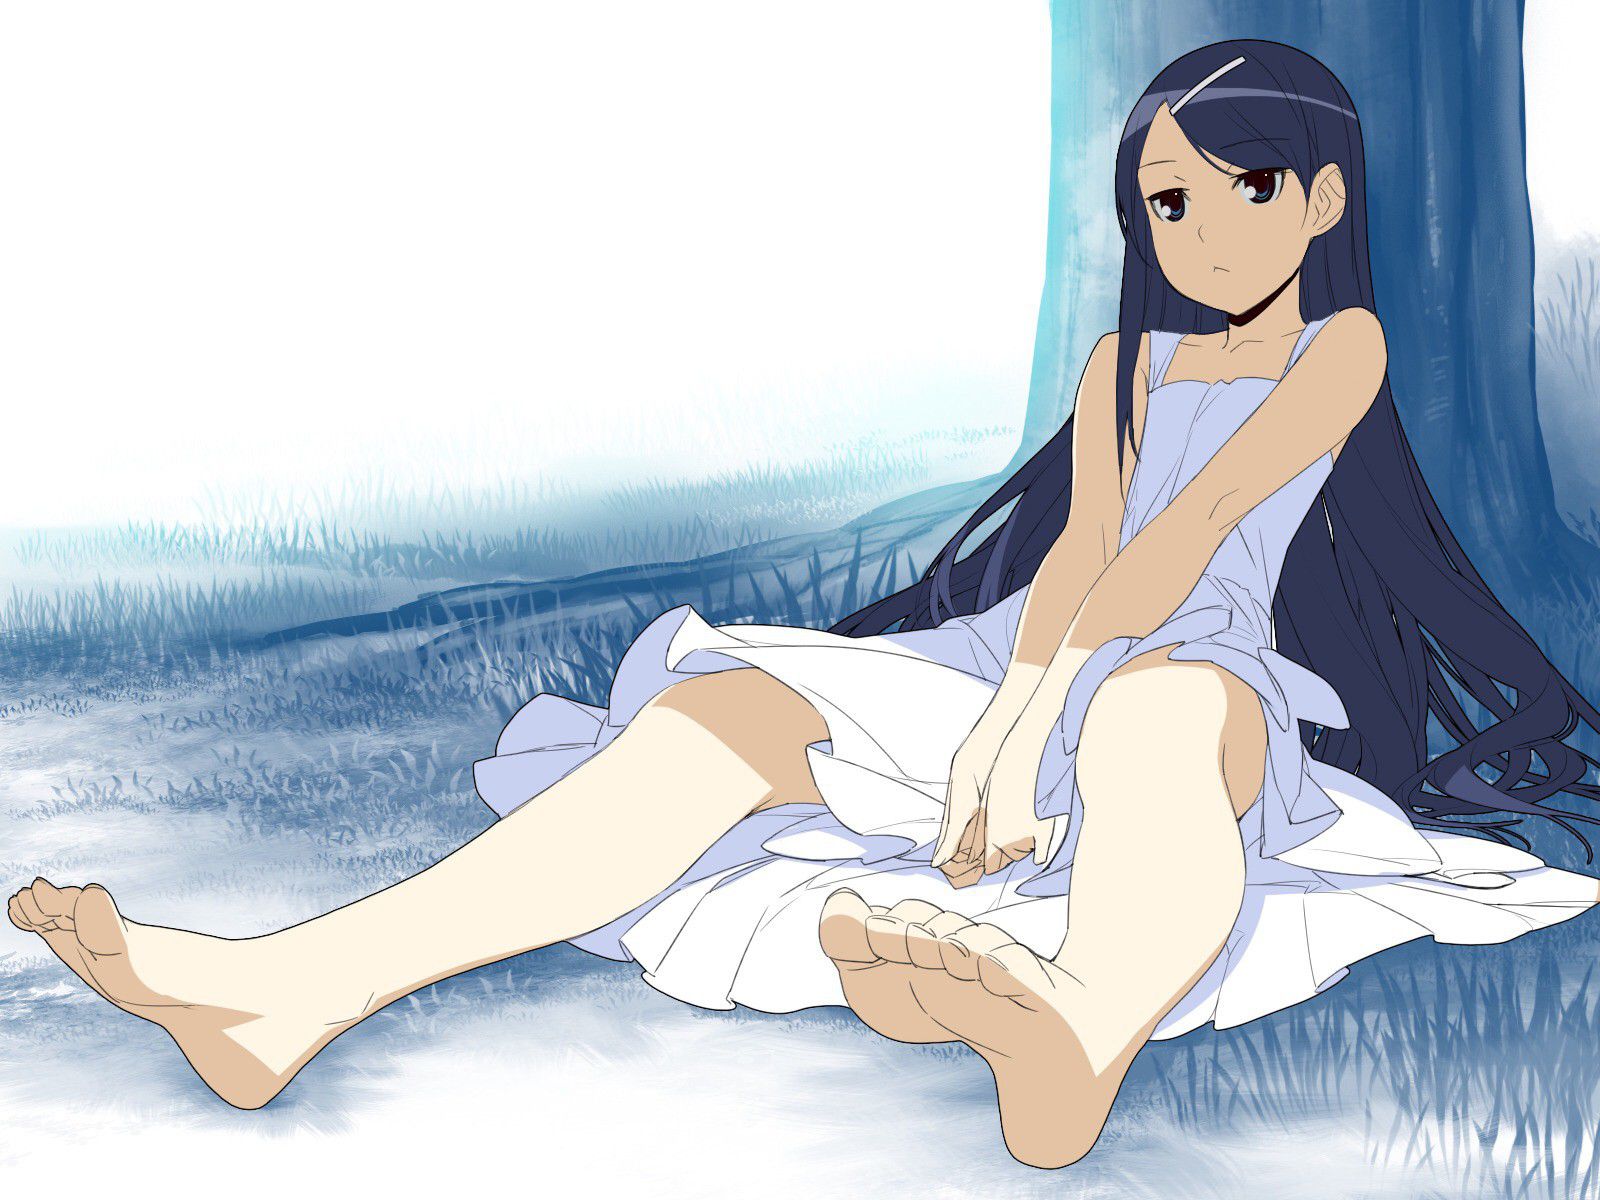 [soup stock] Second image [bare foot] of the girl of the bare foot 13 3